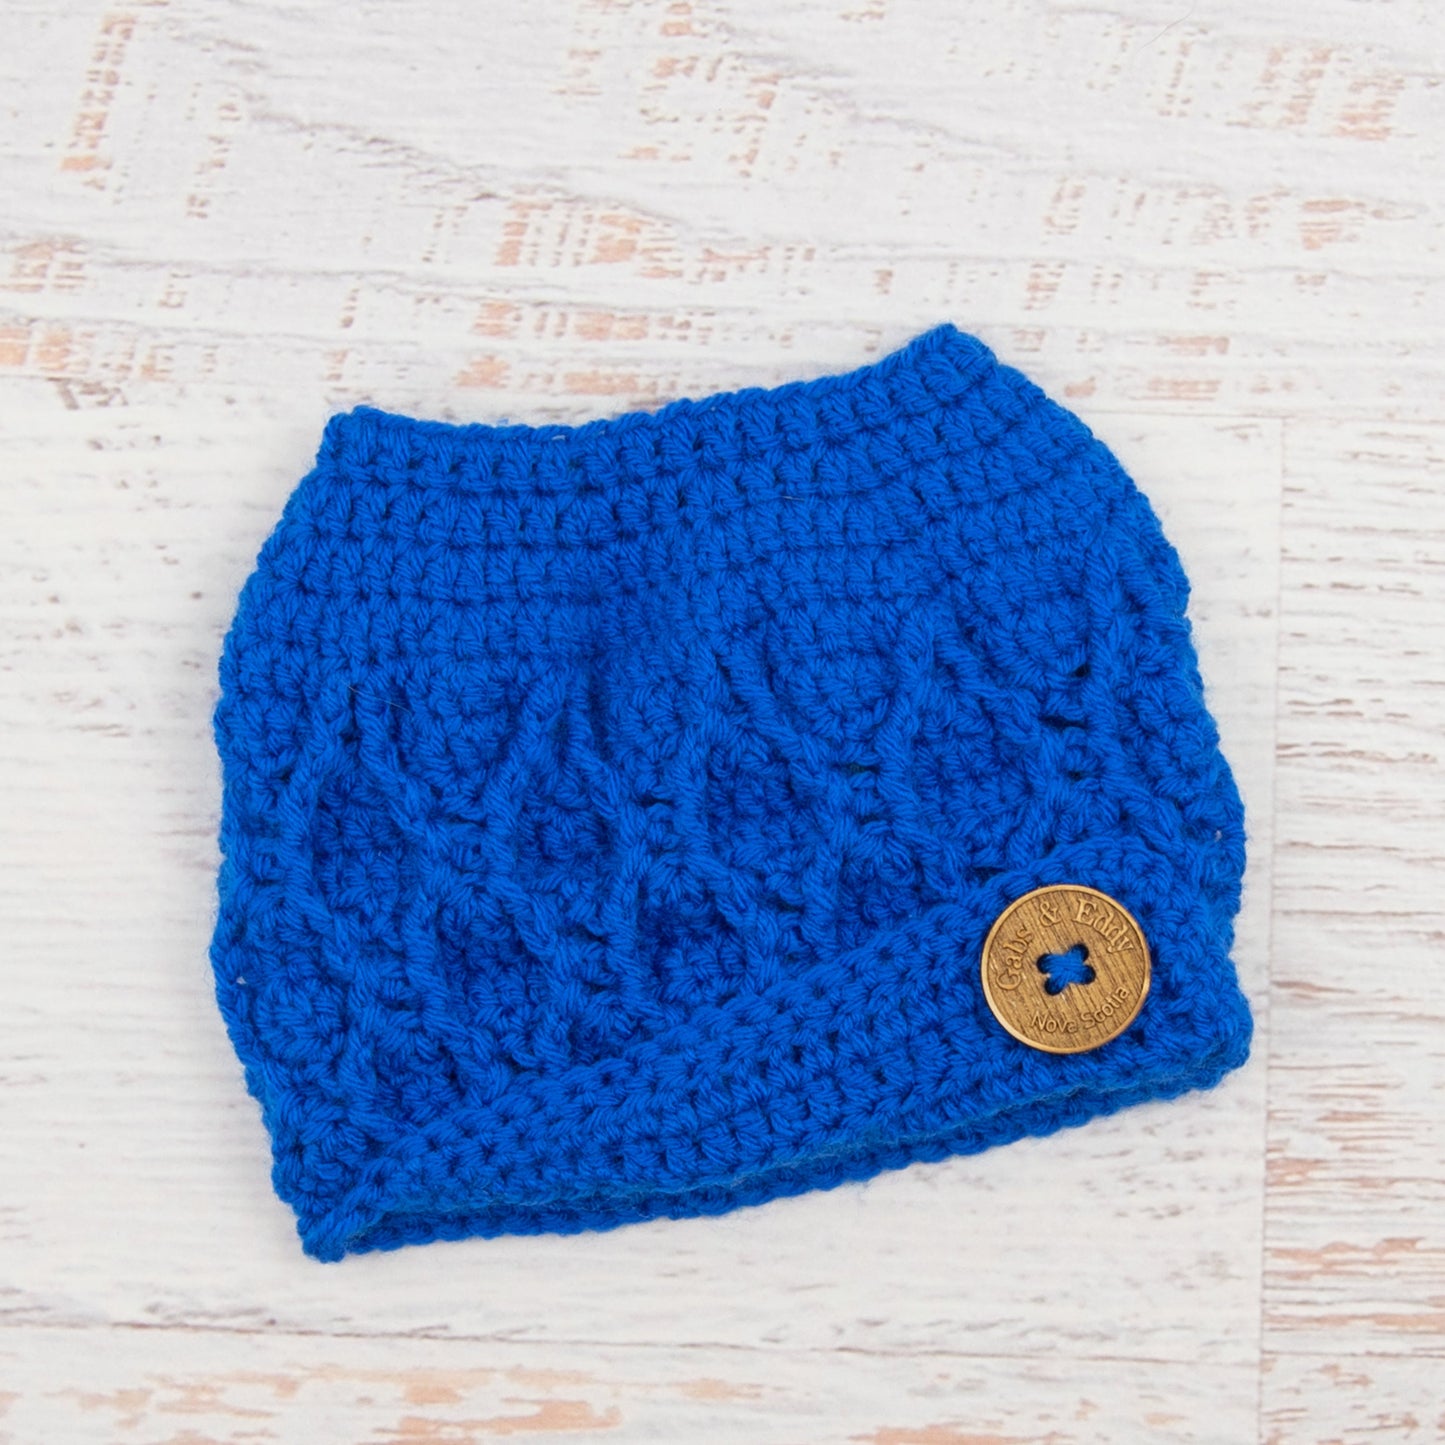 In-Stock 3-10 Year The 'Dressy' Messy Bun Hat in Electric Blue